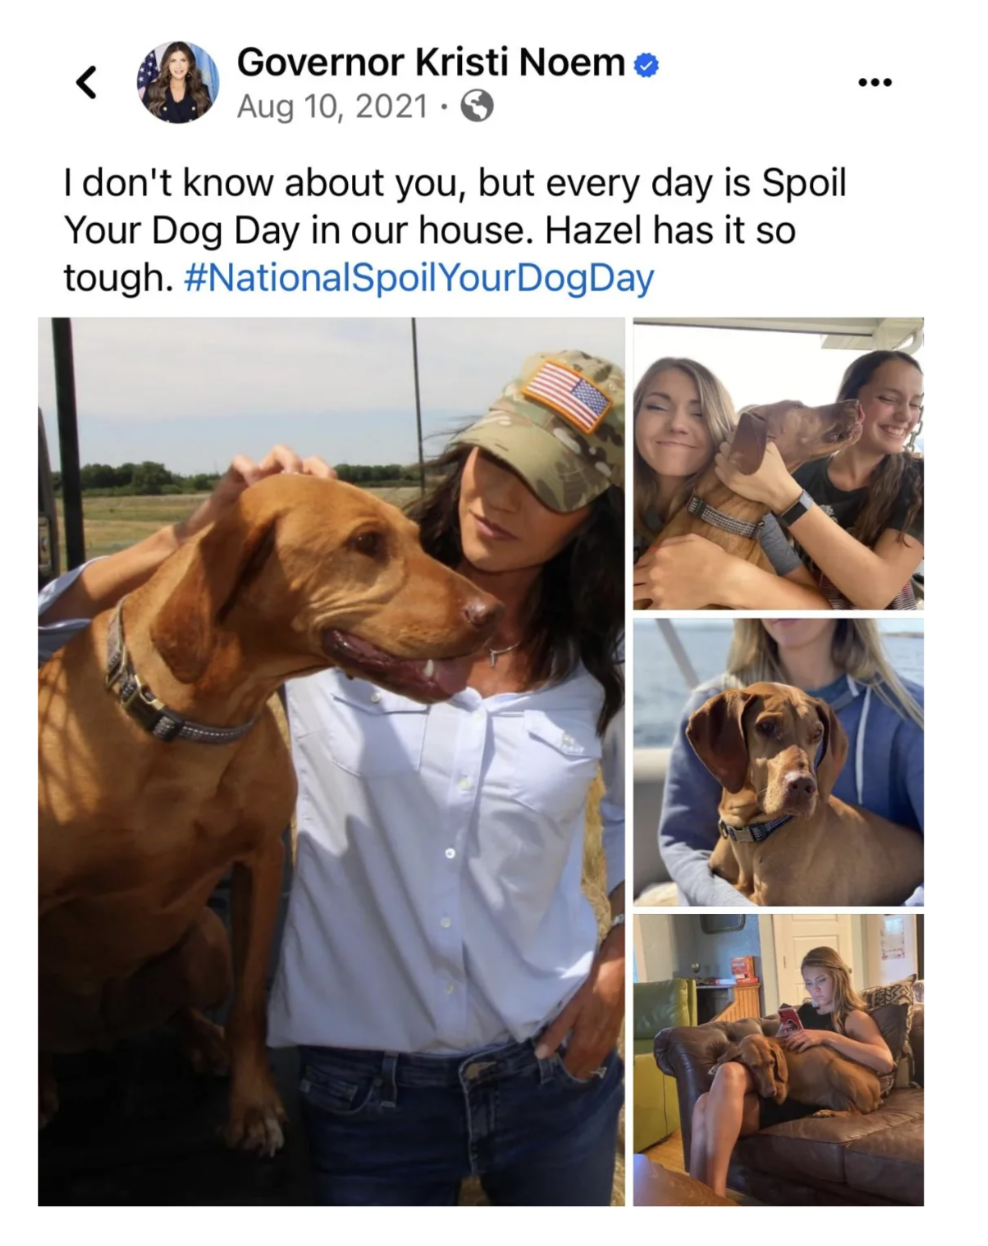 kristi noem dog meme - Governor Kristi Noem . I don't know about you, but every day is Spoil Your Dog Day in our house. Hazel has it so tough. YourDogDay